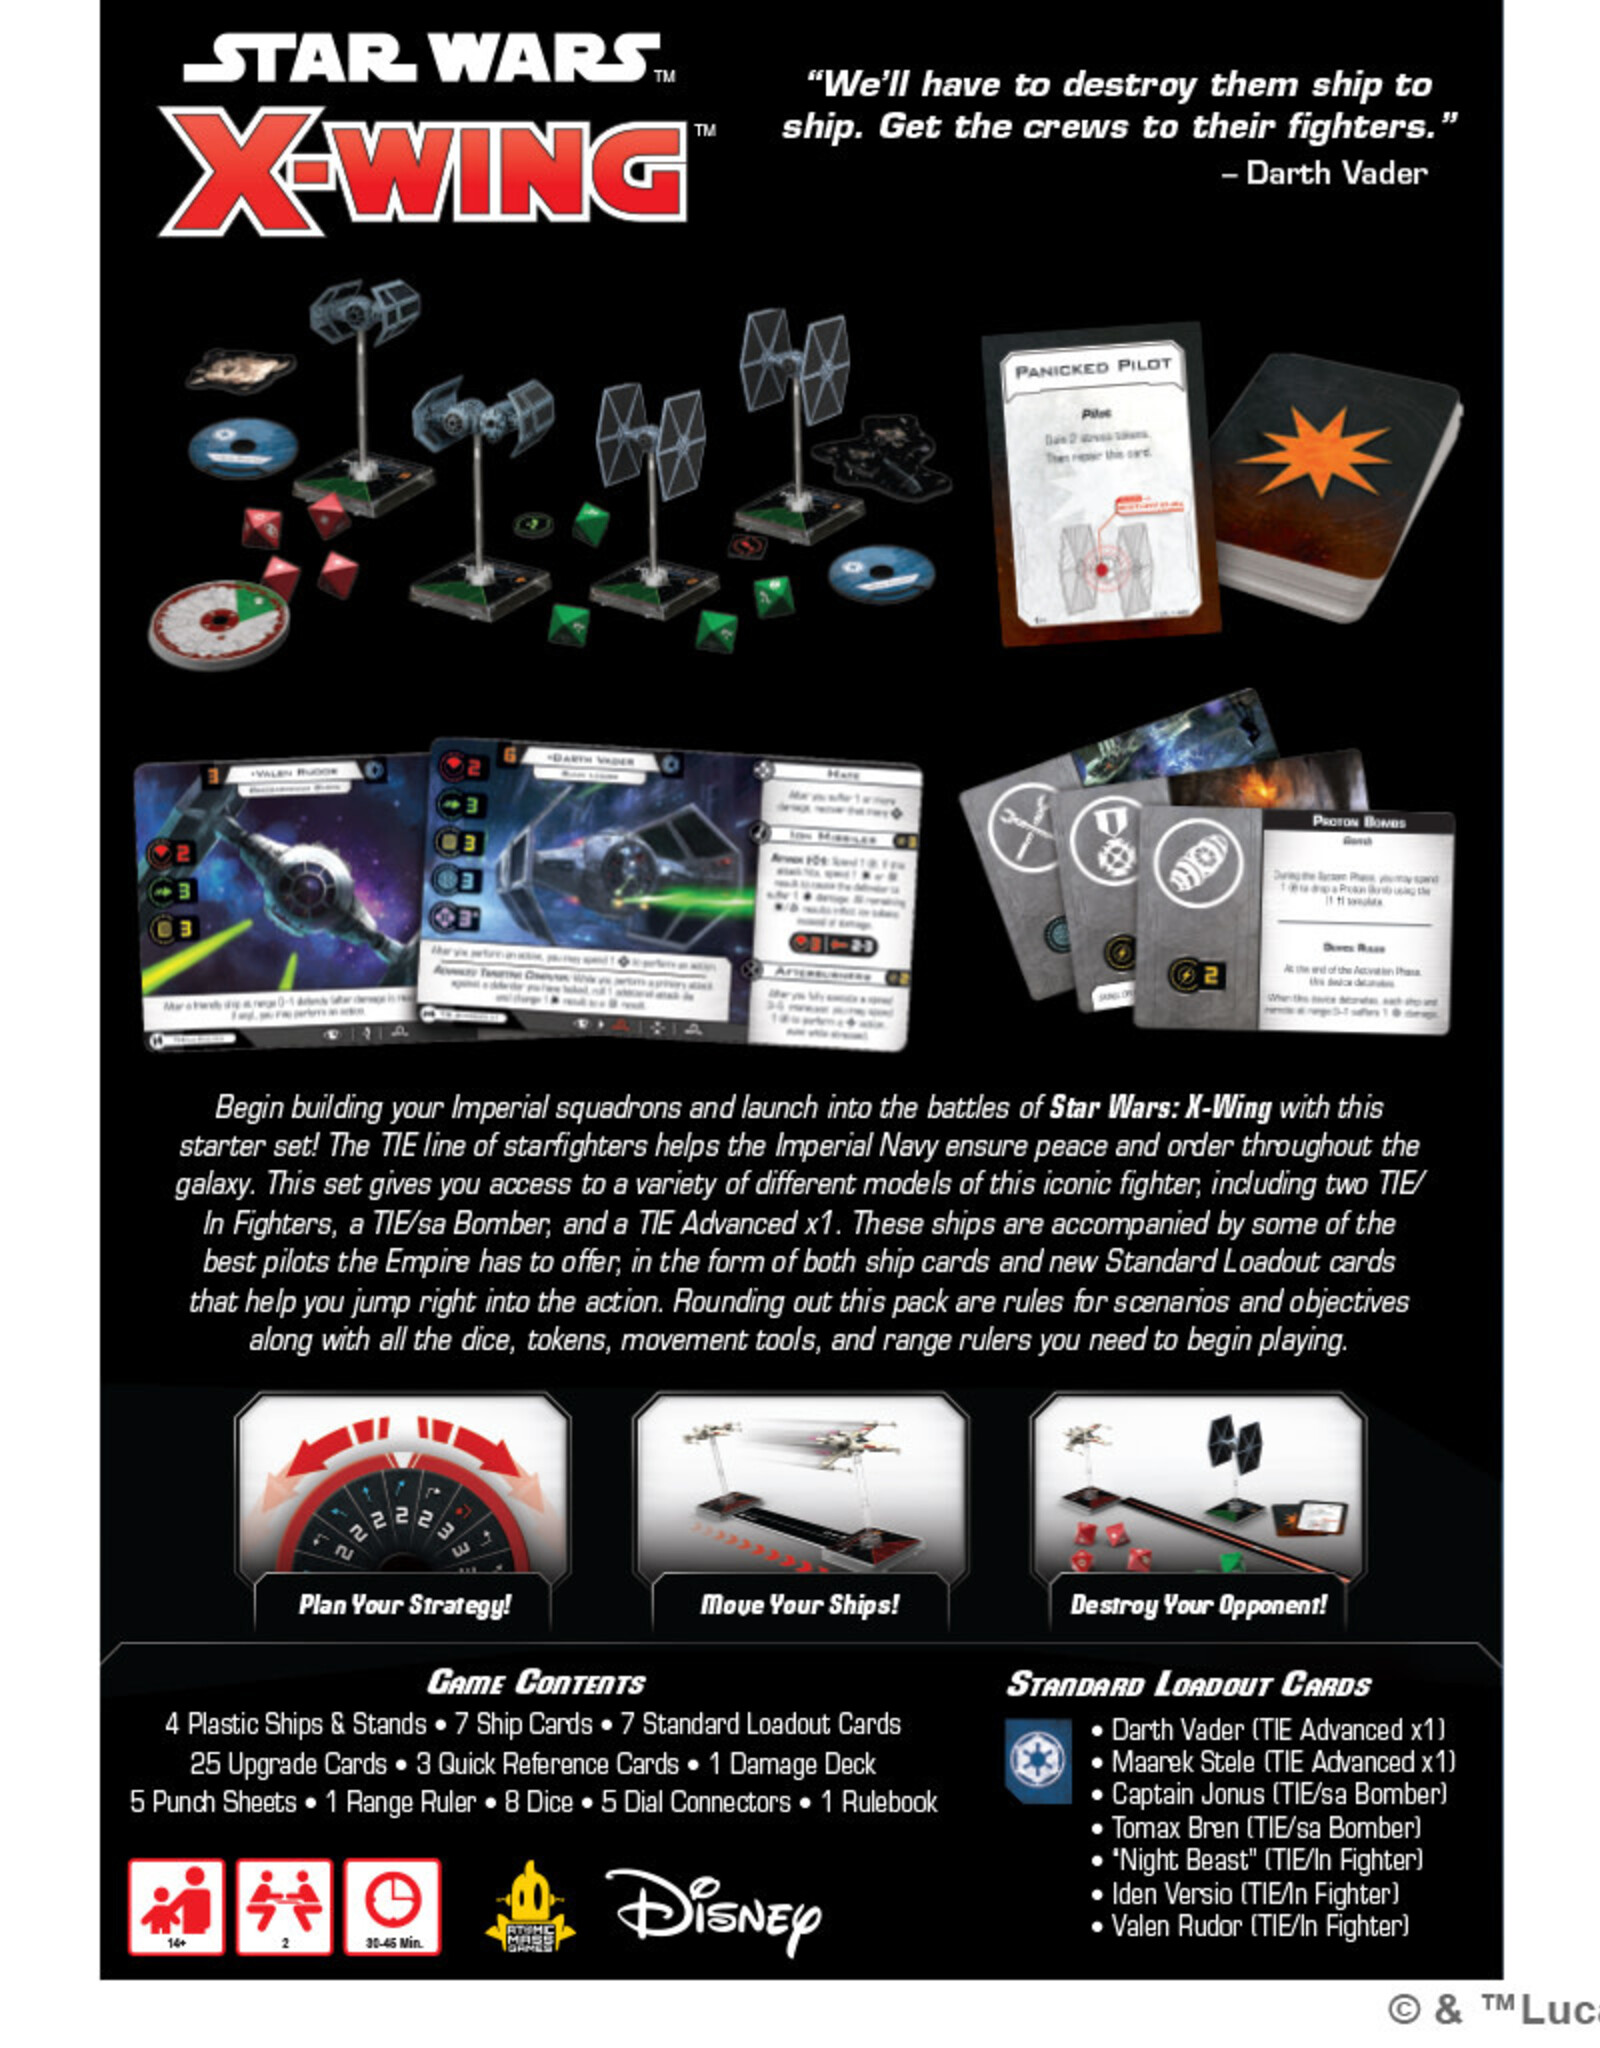 FFG Star Wars X-Wing 2.0: Galactic Empire Squadron Starter Pack